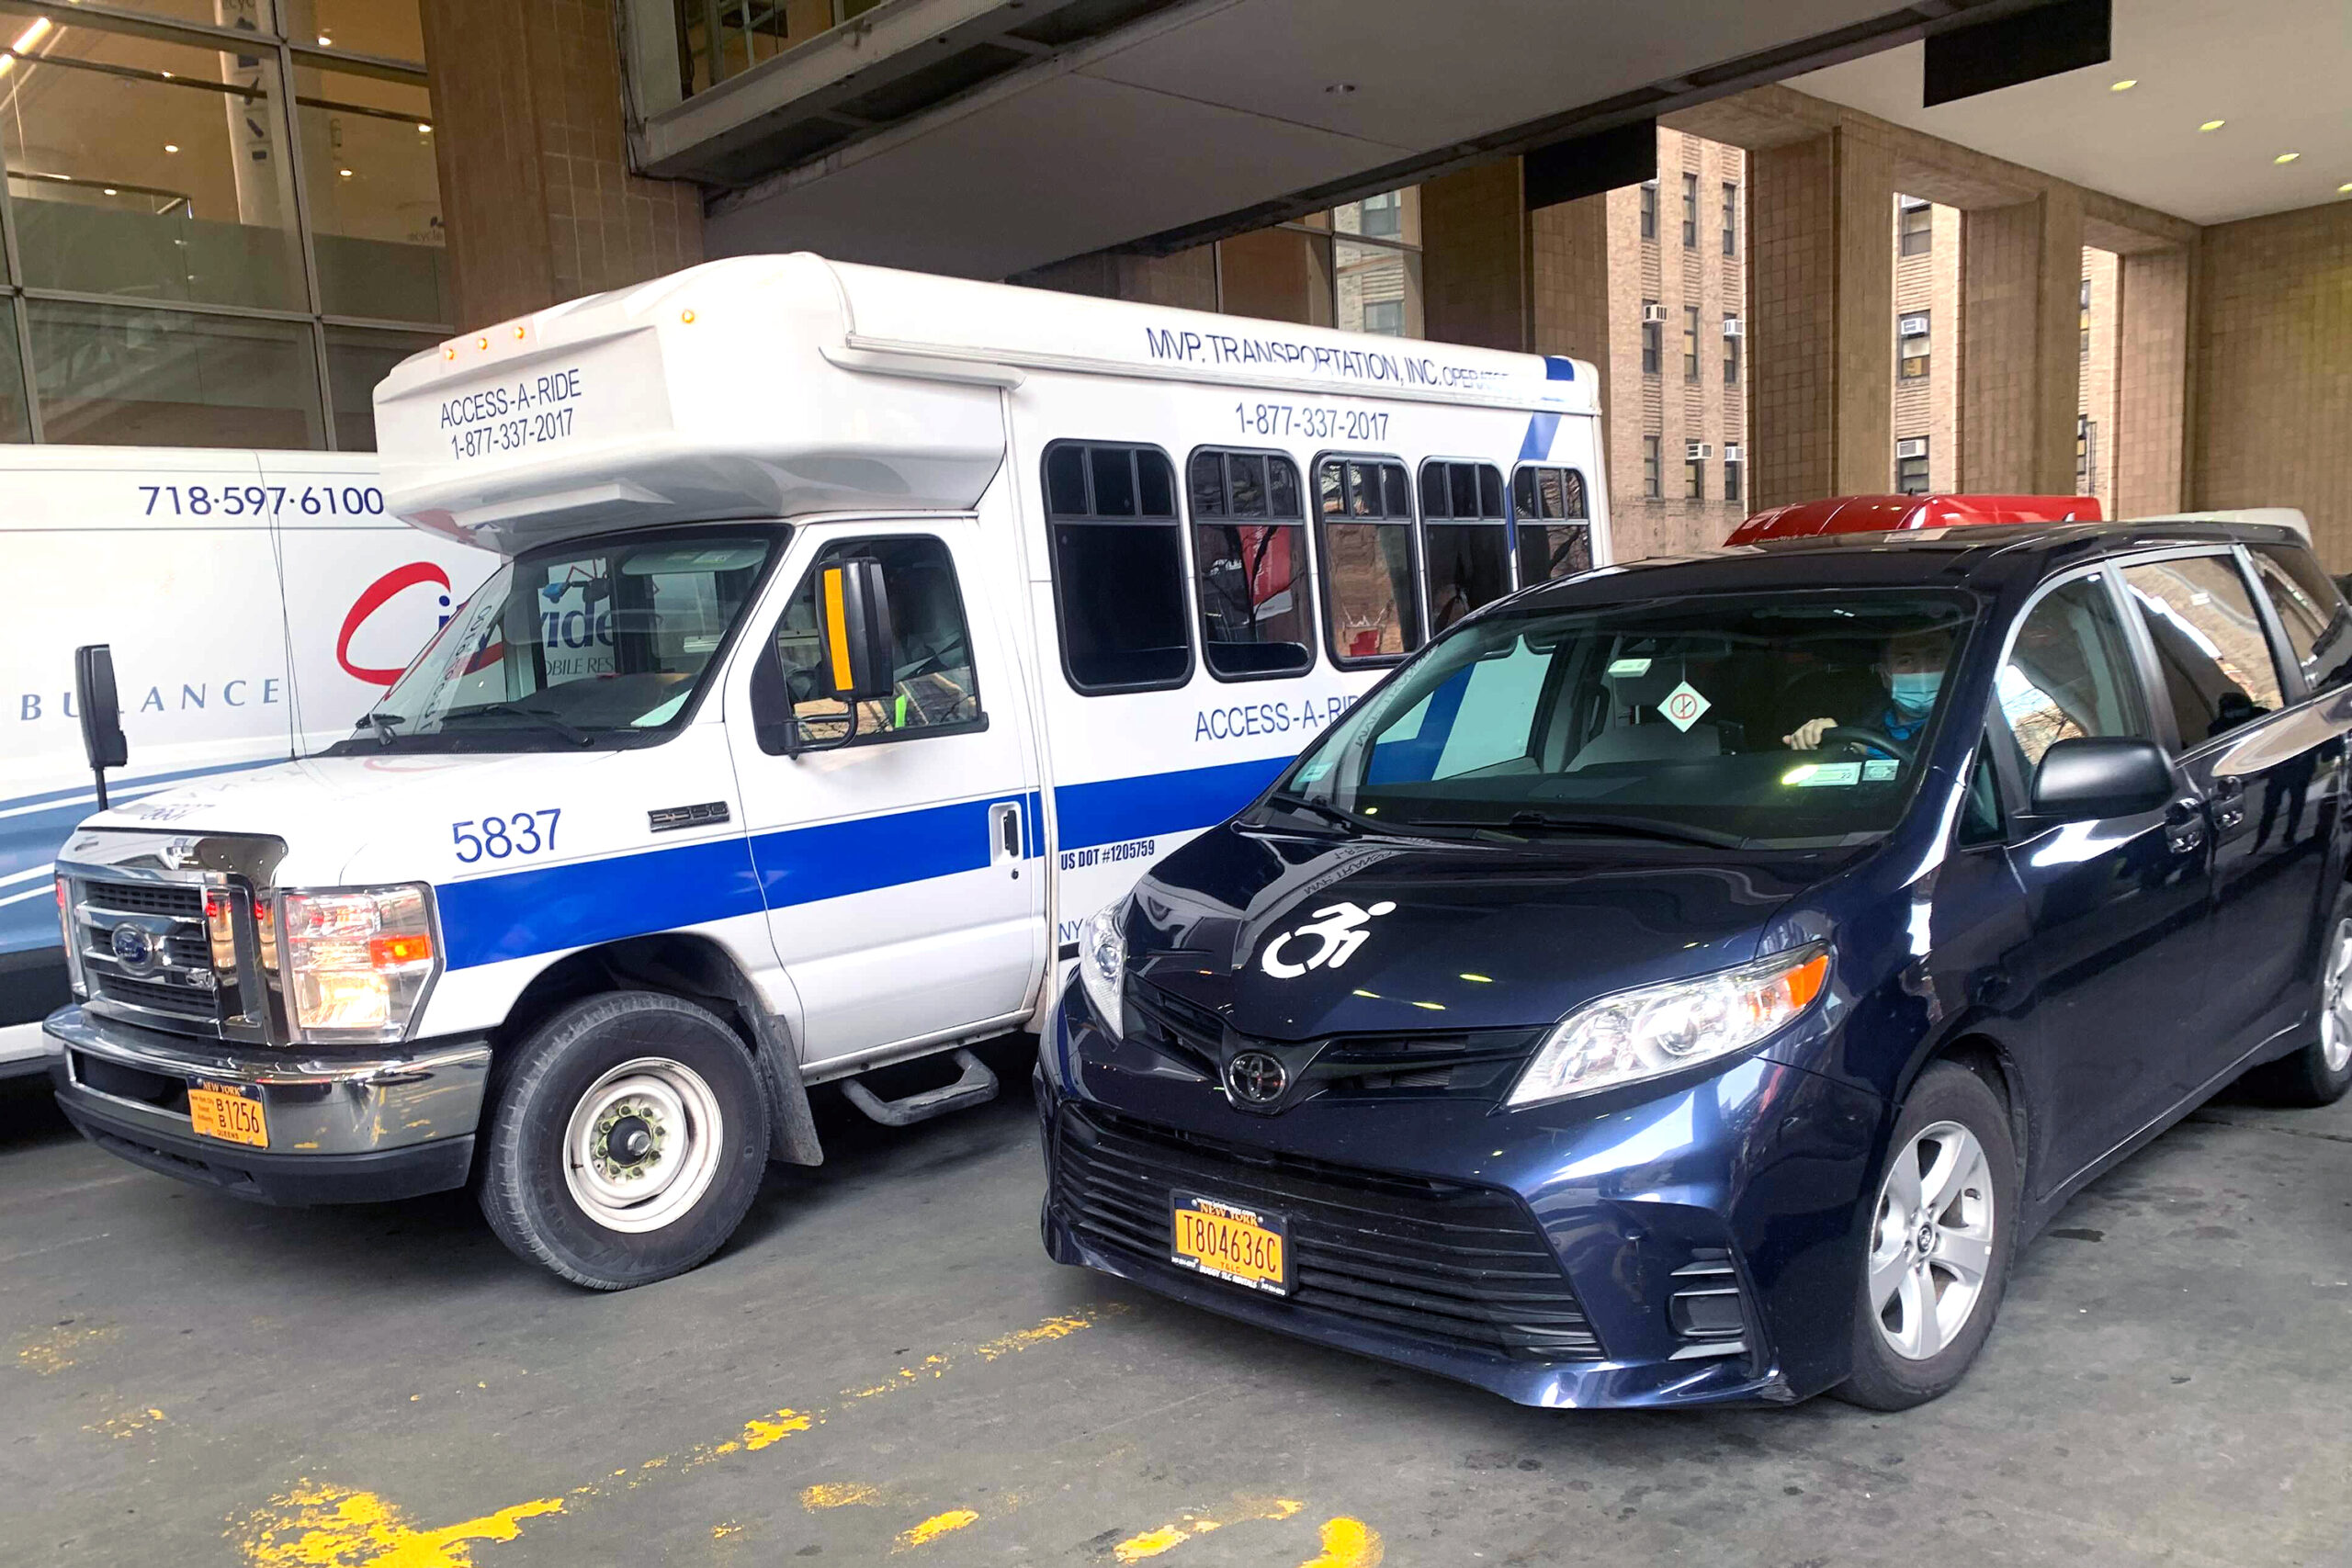 Driver Cash Eyed as Fix for MTA’s Struggling Access-A-Ride